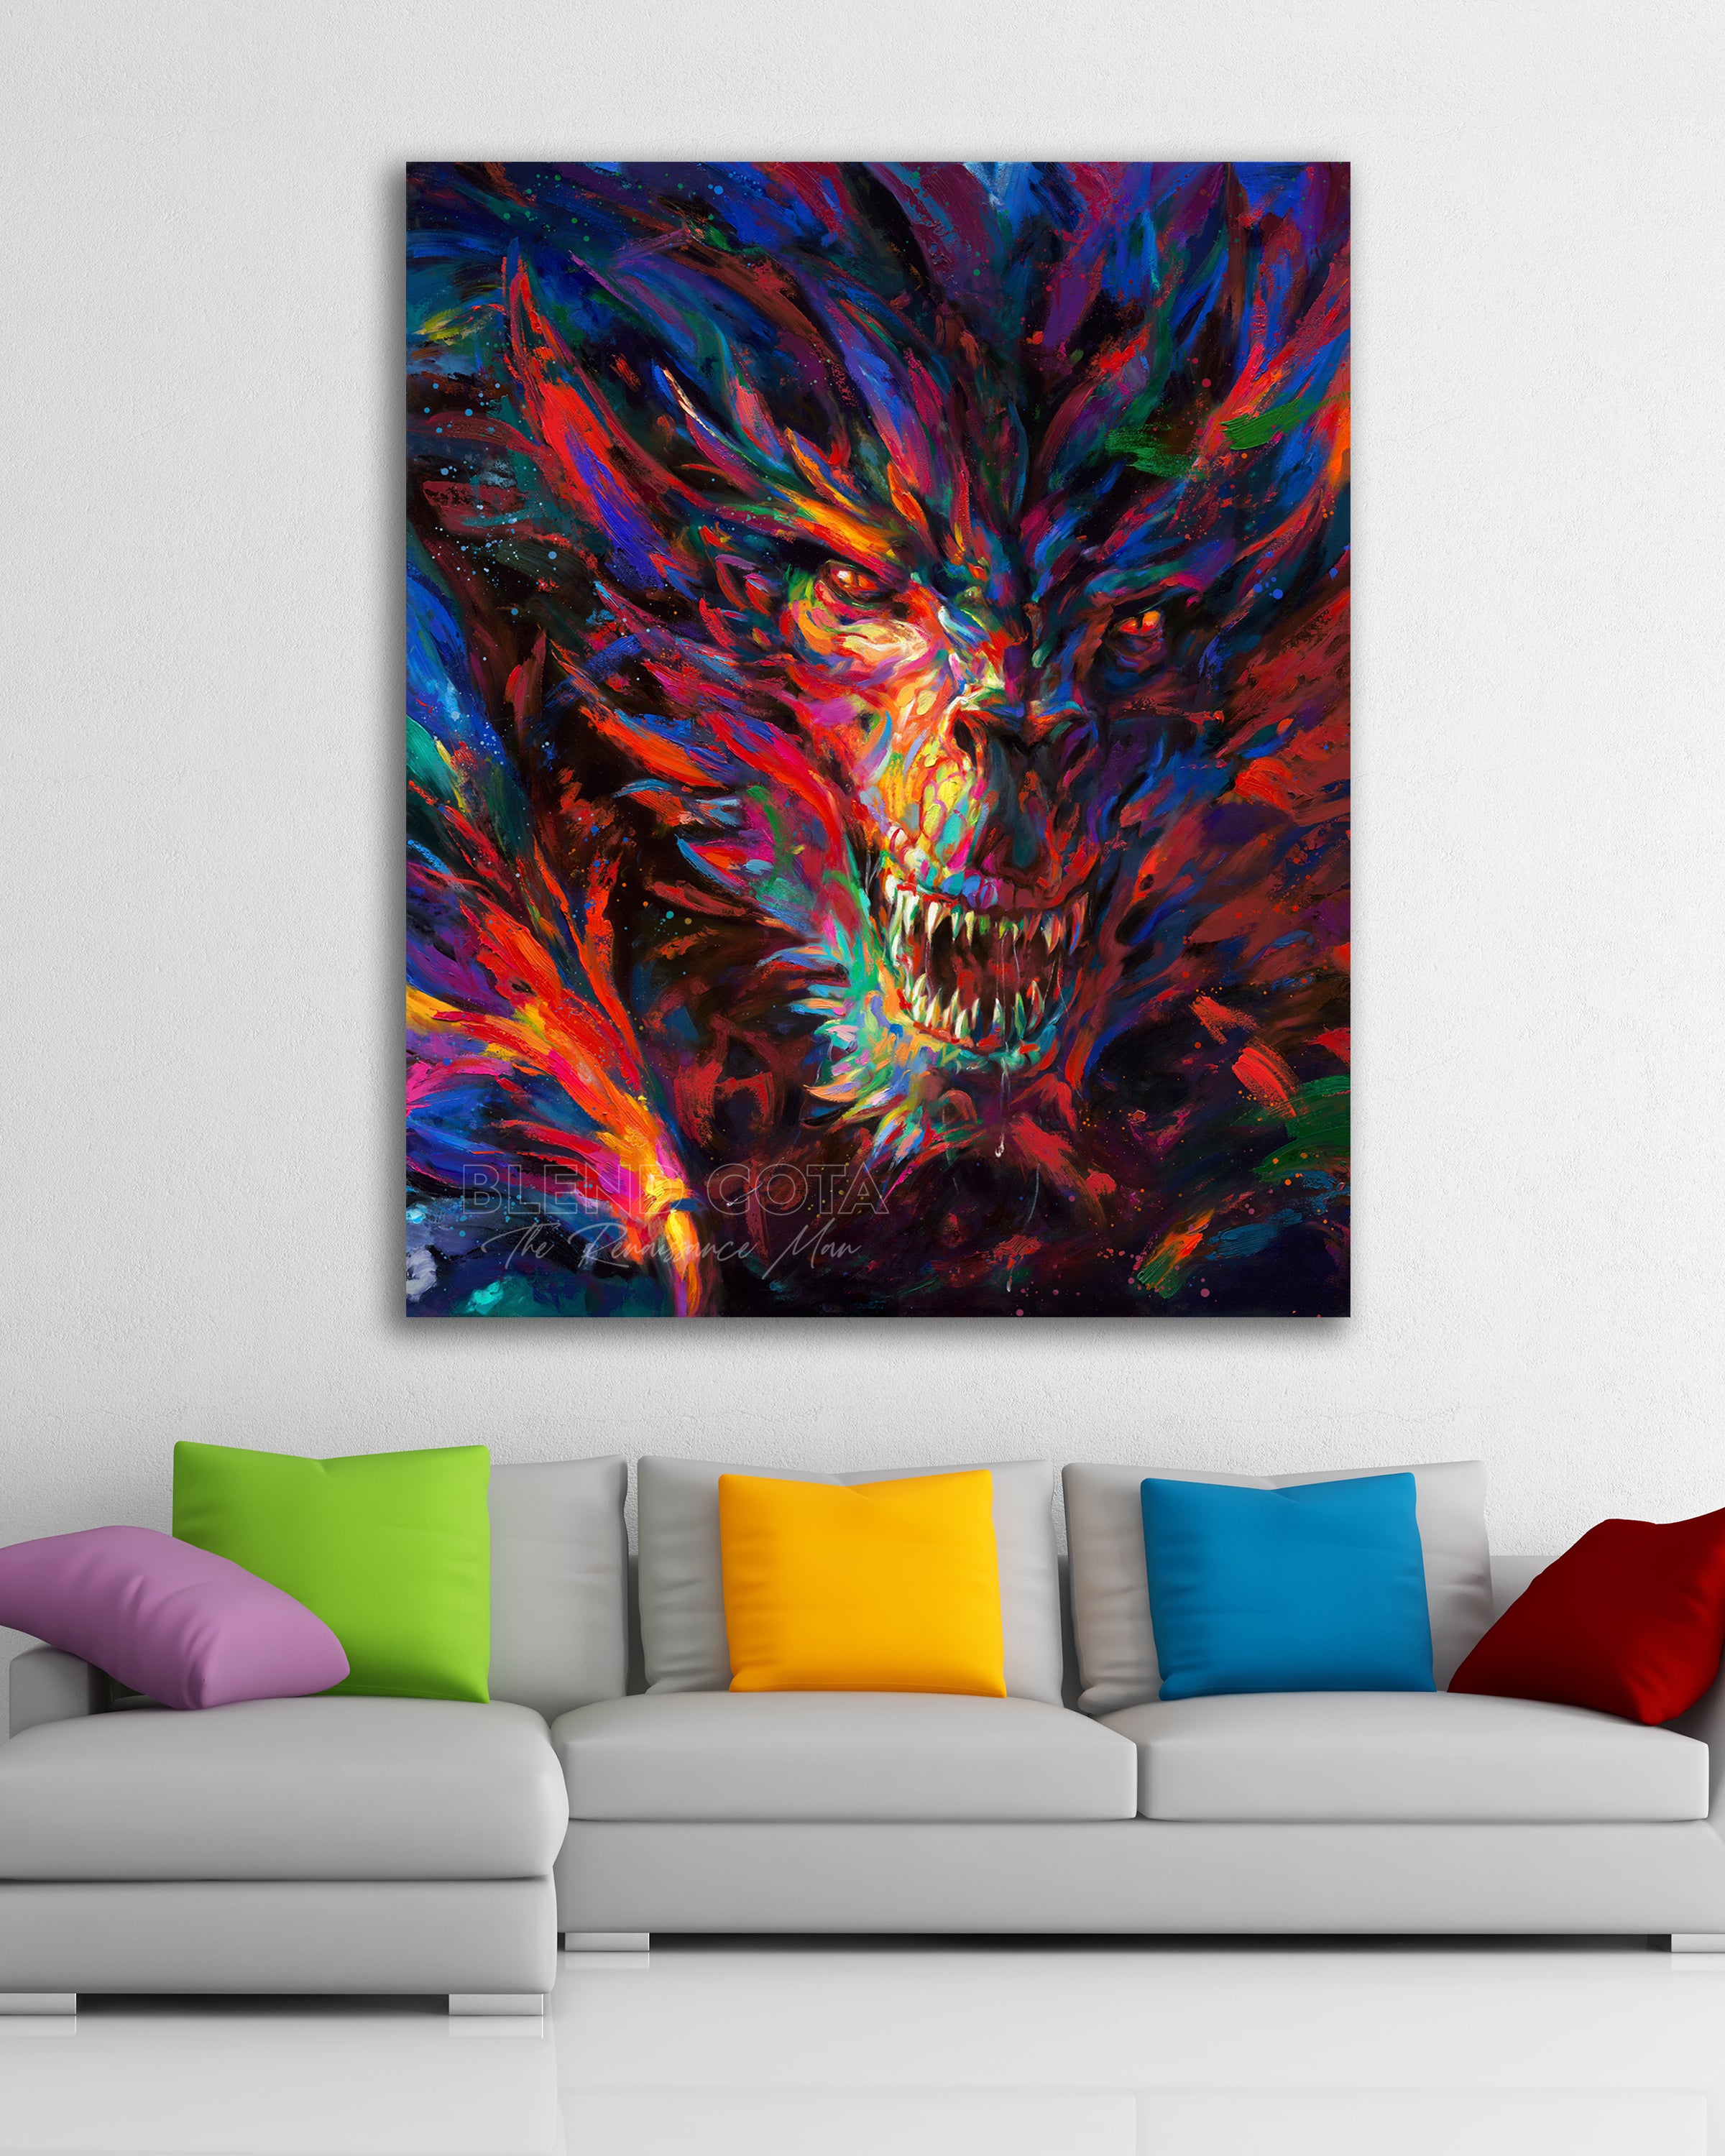 Limited edition print on canvas of the dragon of war, legendary mythical being engulfed in red and blue flame, emerging from darkness with colorful brushstrokes in an expressionistic style in a room setting.